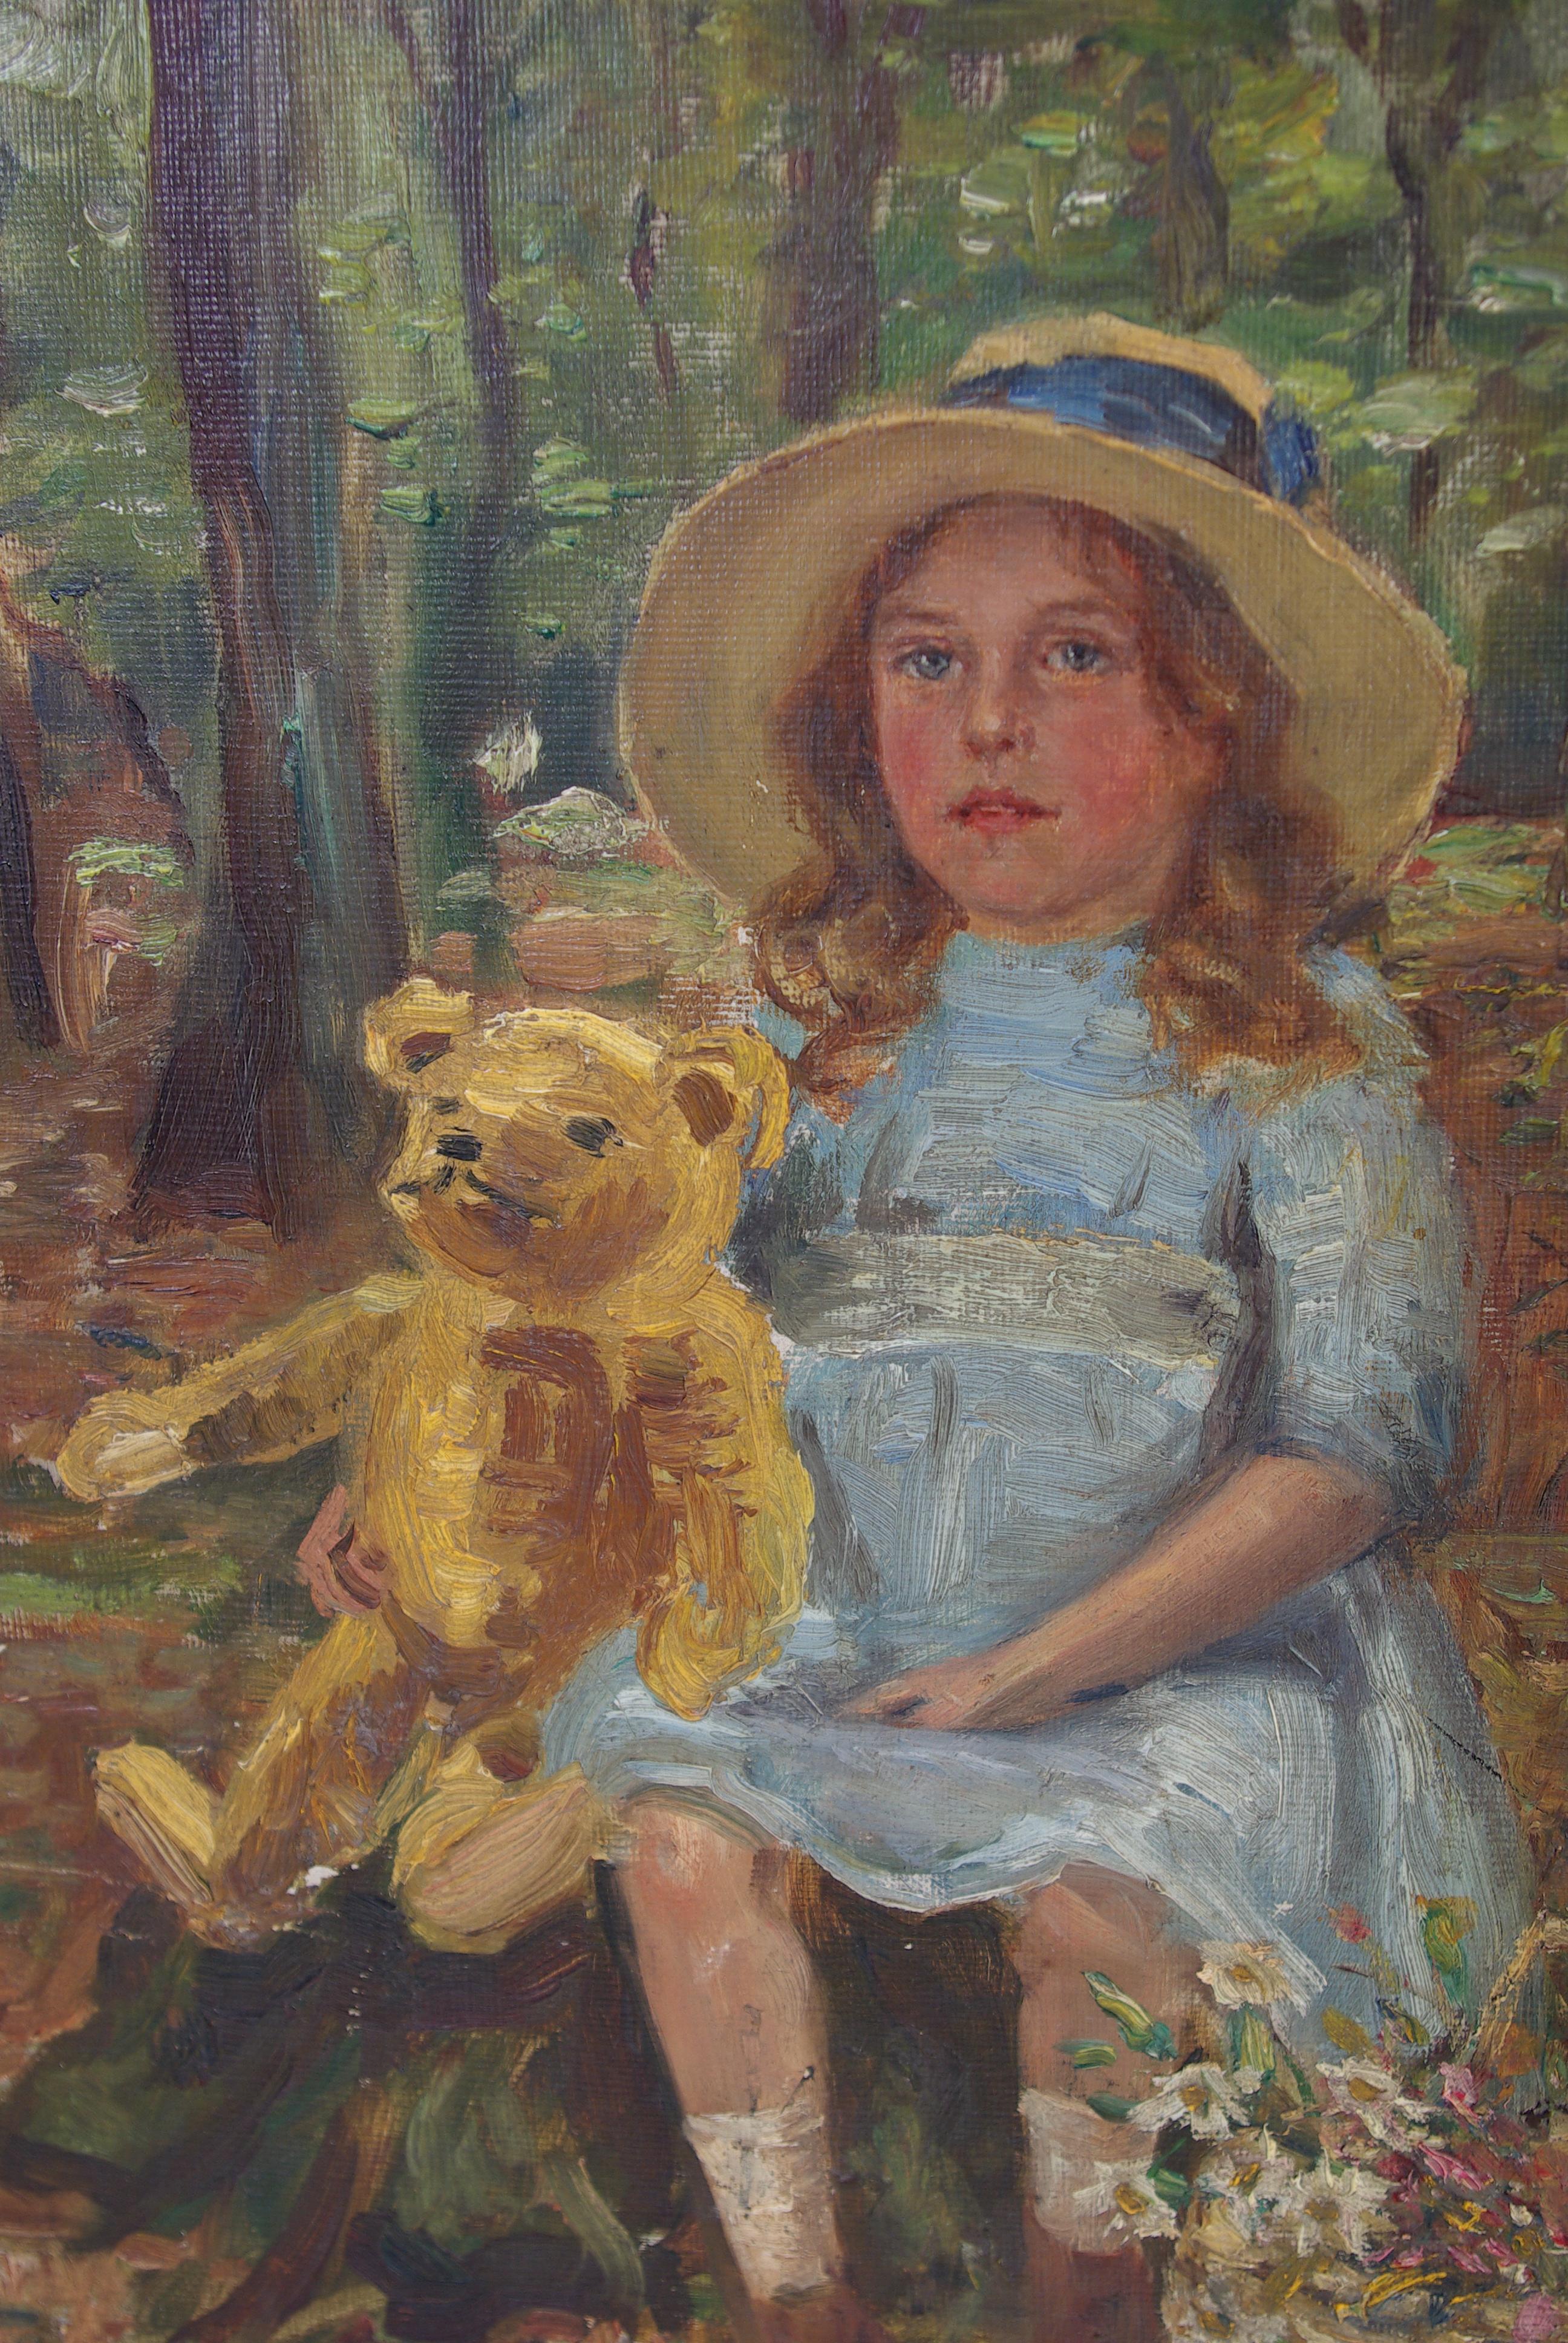 Young girl (Doreen) sitting on log with teddy bear & bouquet of flowers
Signed and dated 1913
Wonderful subject
Original frame by Fortescu Mann, London

$525.00

Measures: Frame: 15